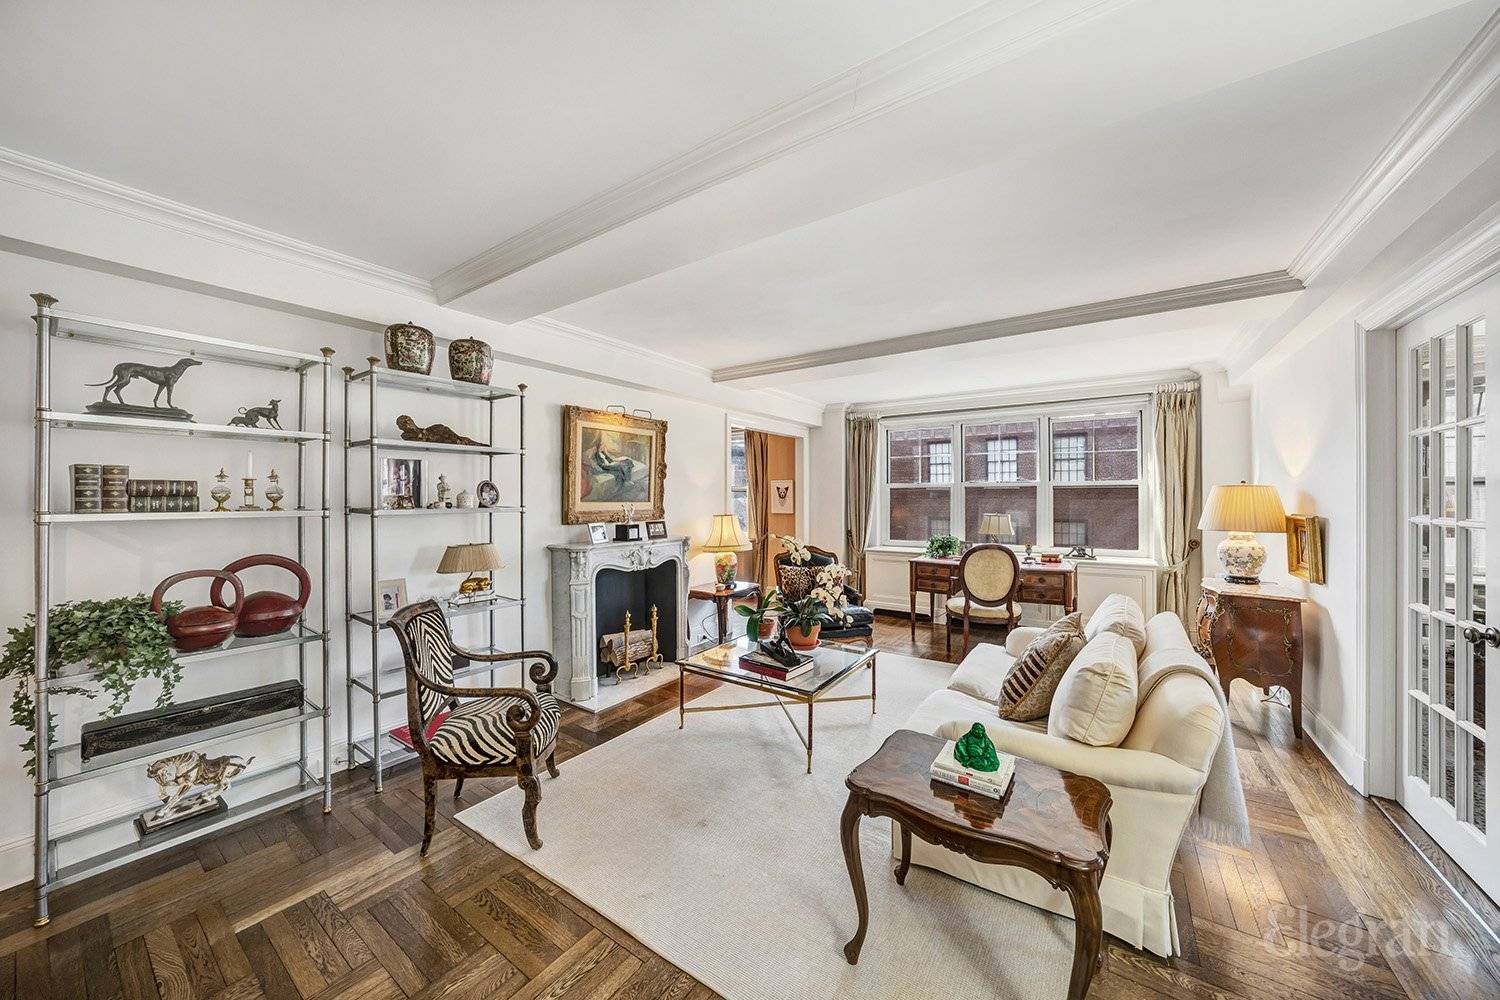 This 5 room Park Avenue apartment epitomizes easy elegance, offering approximately 1600 square feet of luxurious living space in one of New York City s most coveted locations.